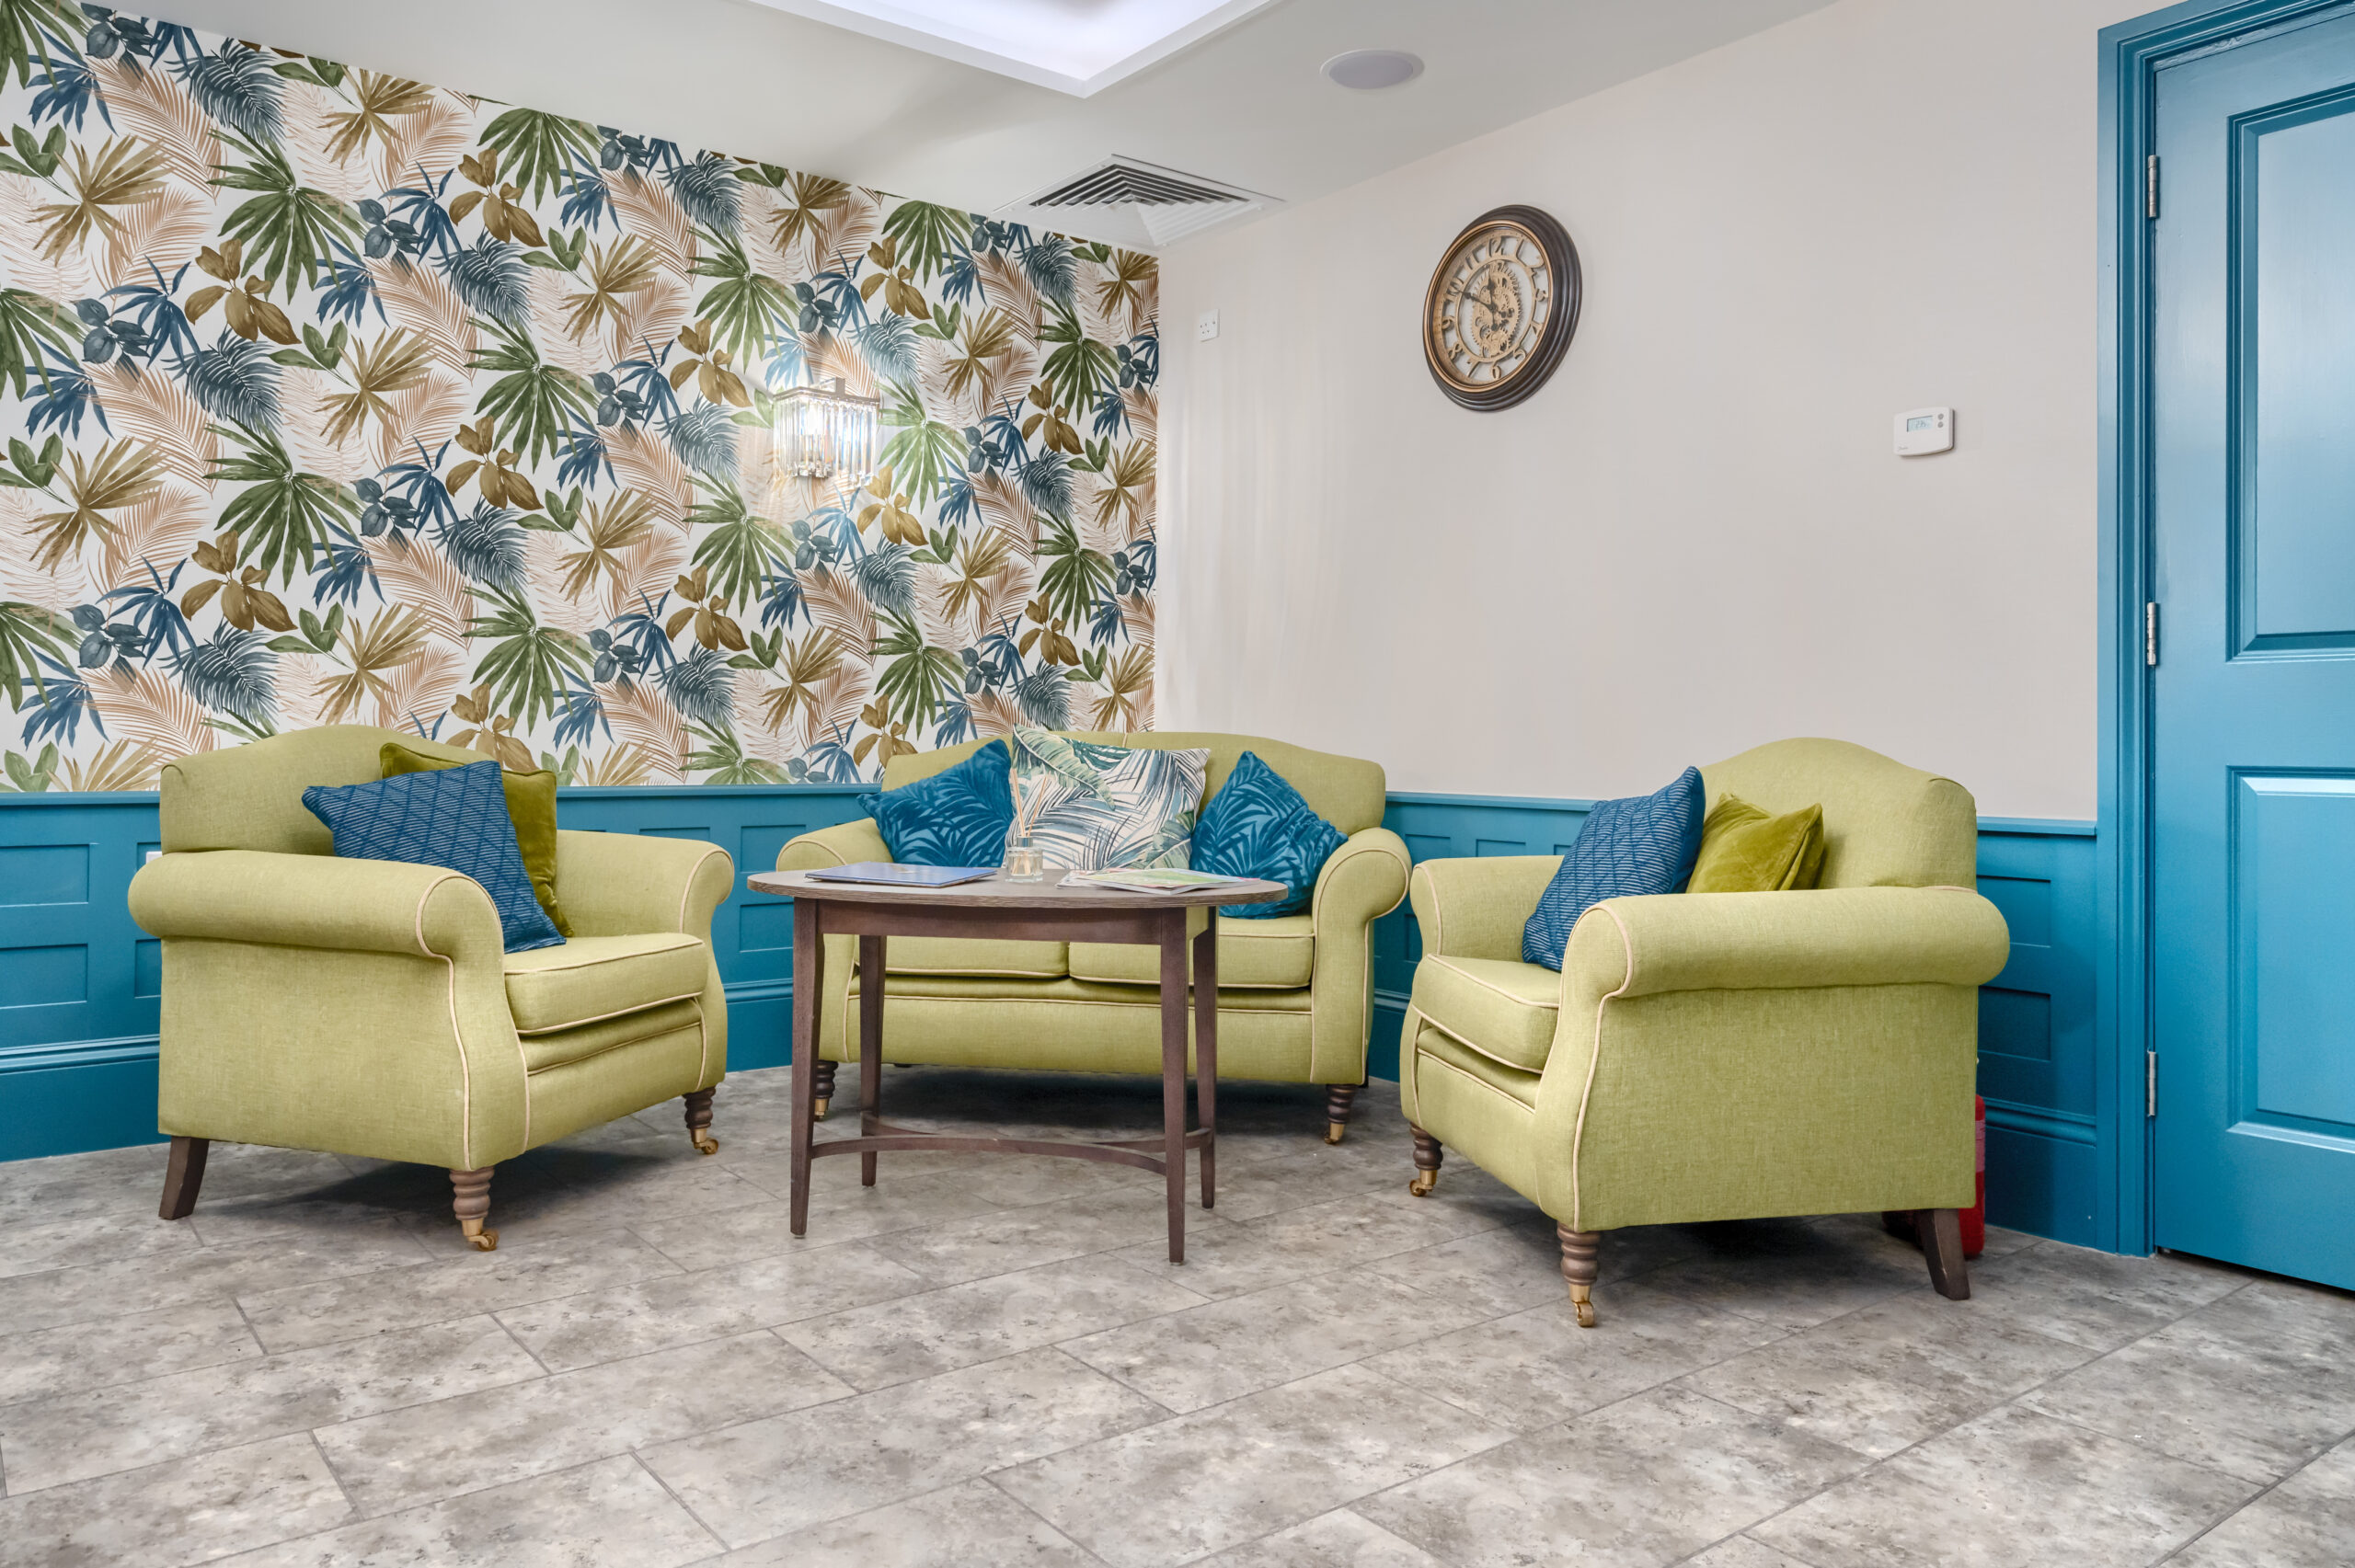 Beechwood Grove Care Home seating area with flowery wallpaper and clock on wall